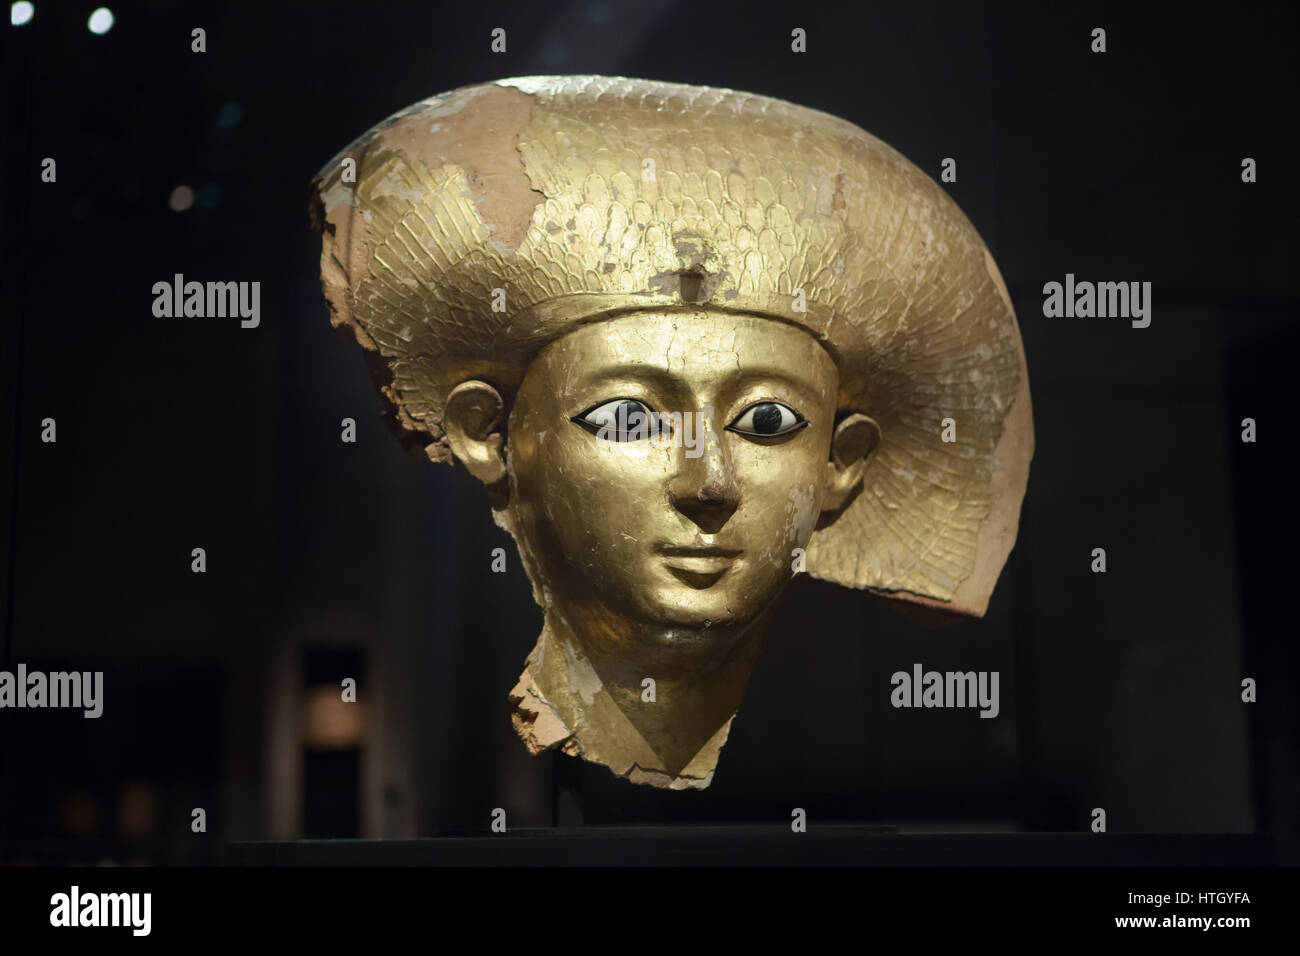 photography stock images Alamy hi-res queen and Ancient - egyptian